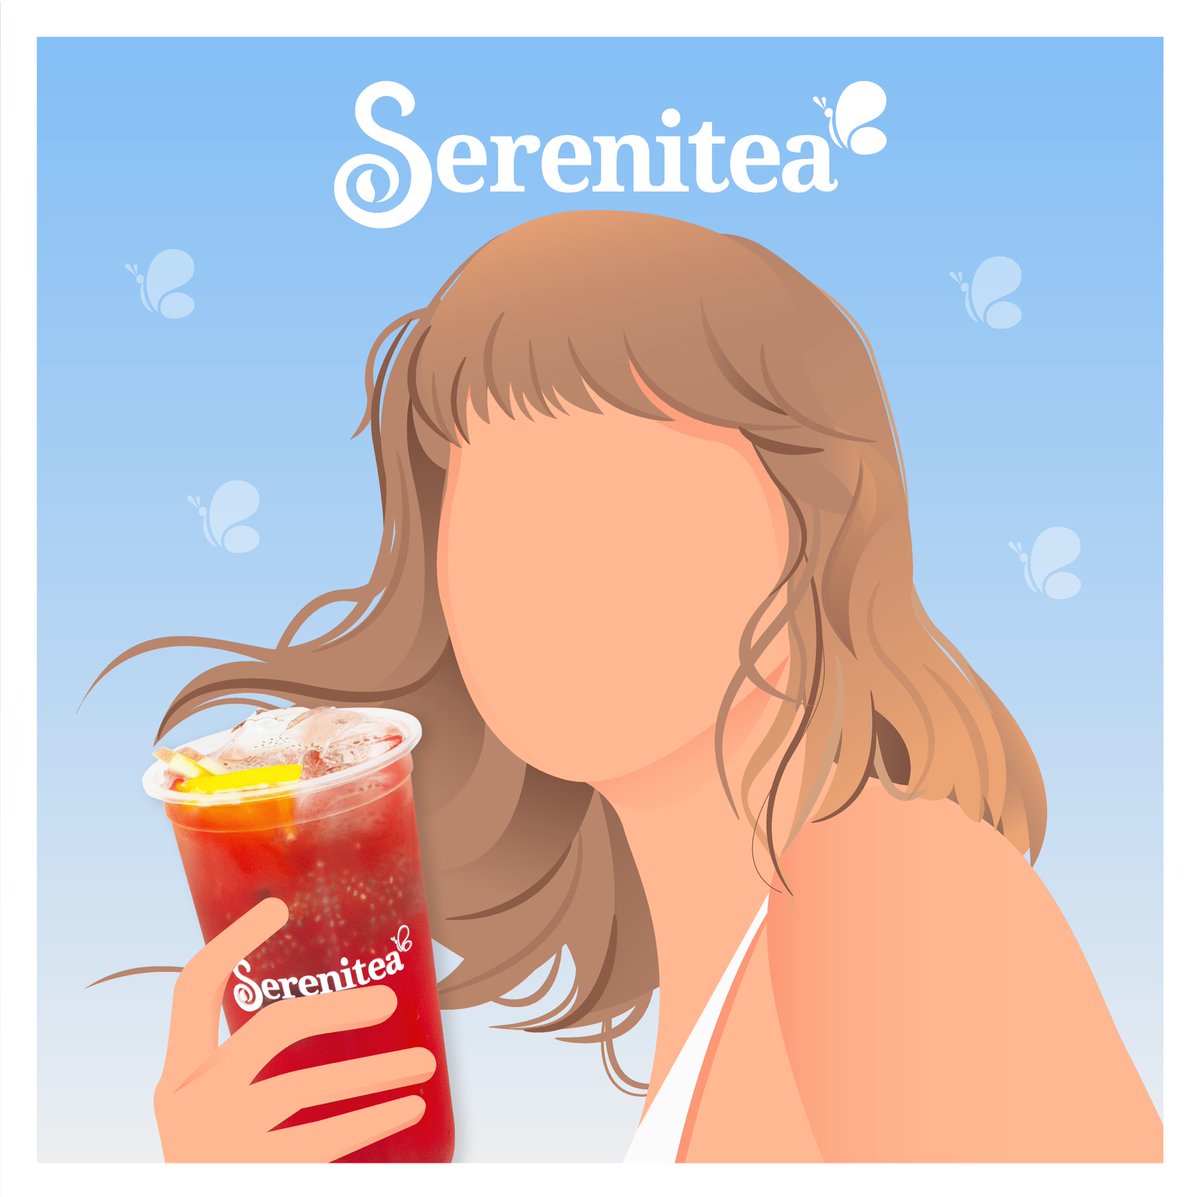 Welcome to Serenitea, we’ve been waiting for you 🎶 Moments of Serenitea never go out of style, don’t you agree? 💚